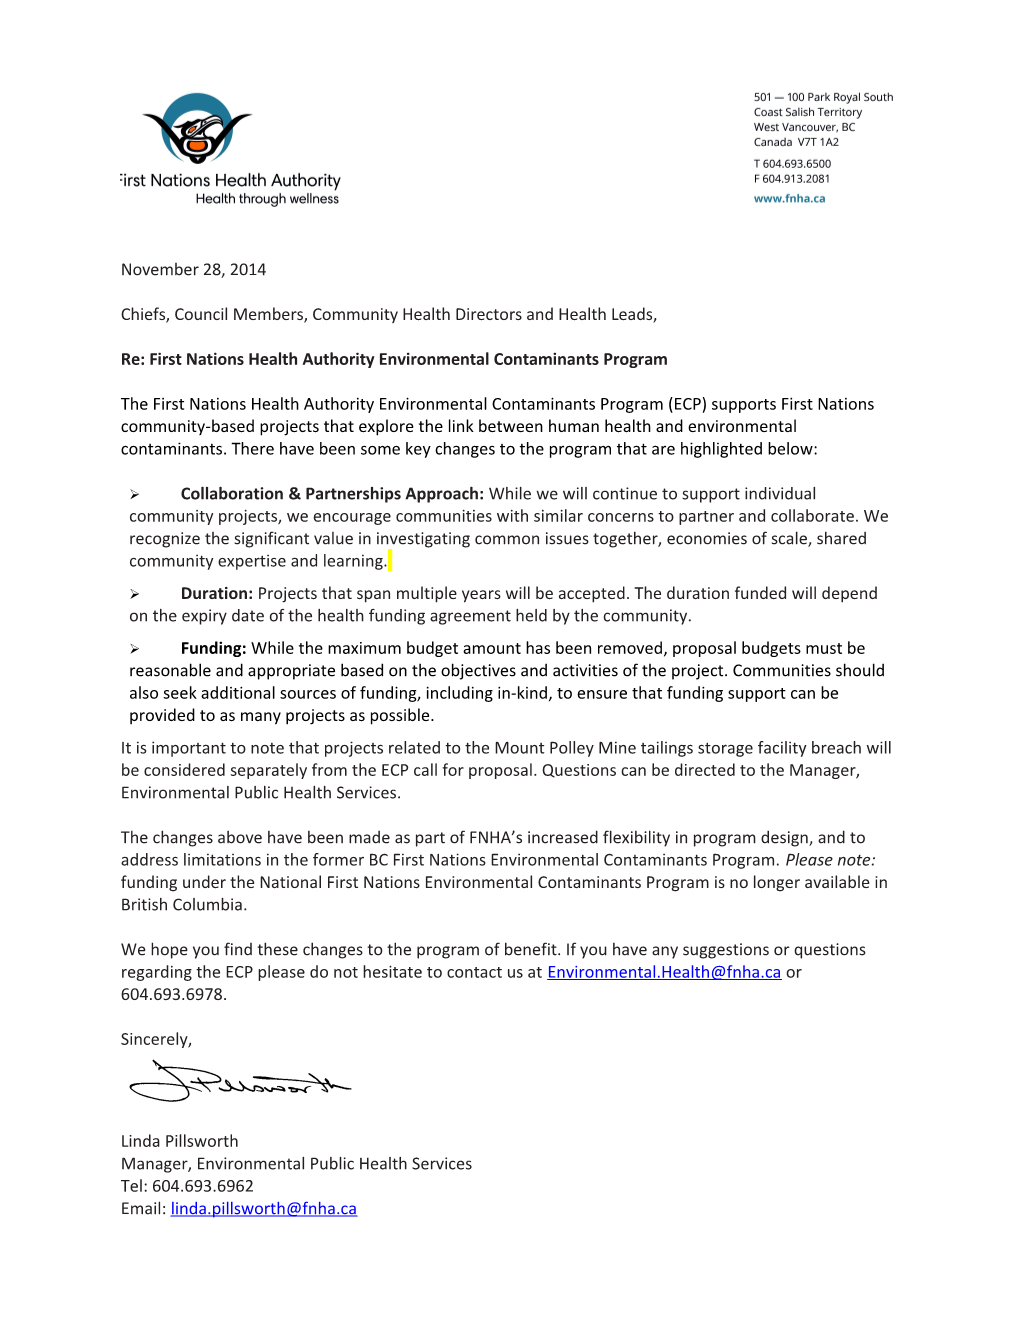 Re: First Nations Health Authority Environmental Contaminants Program